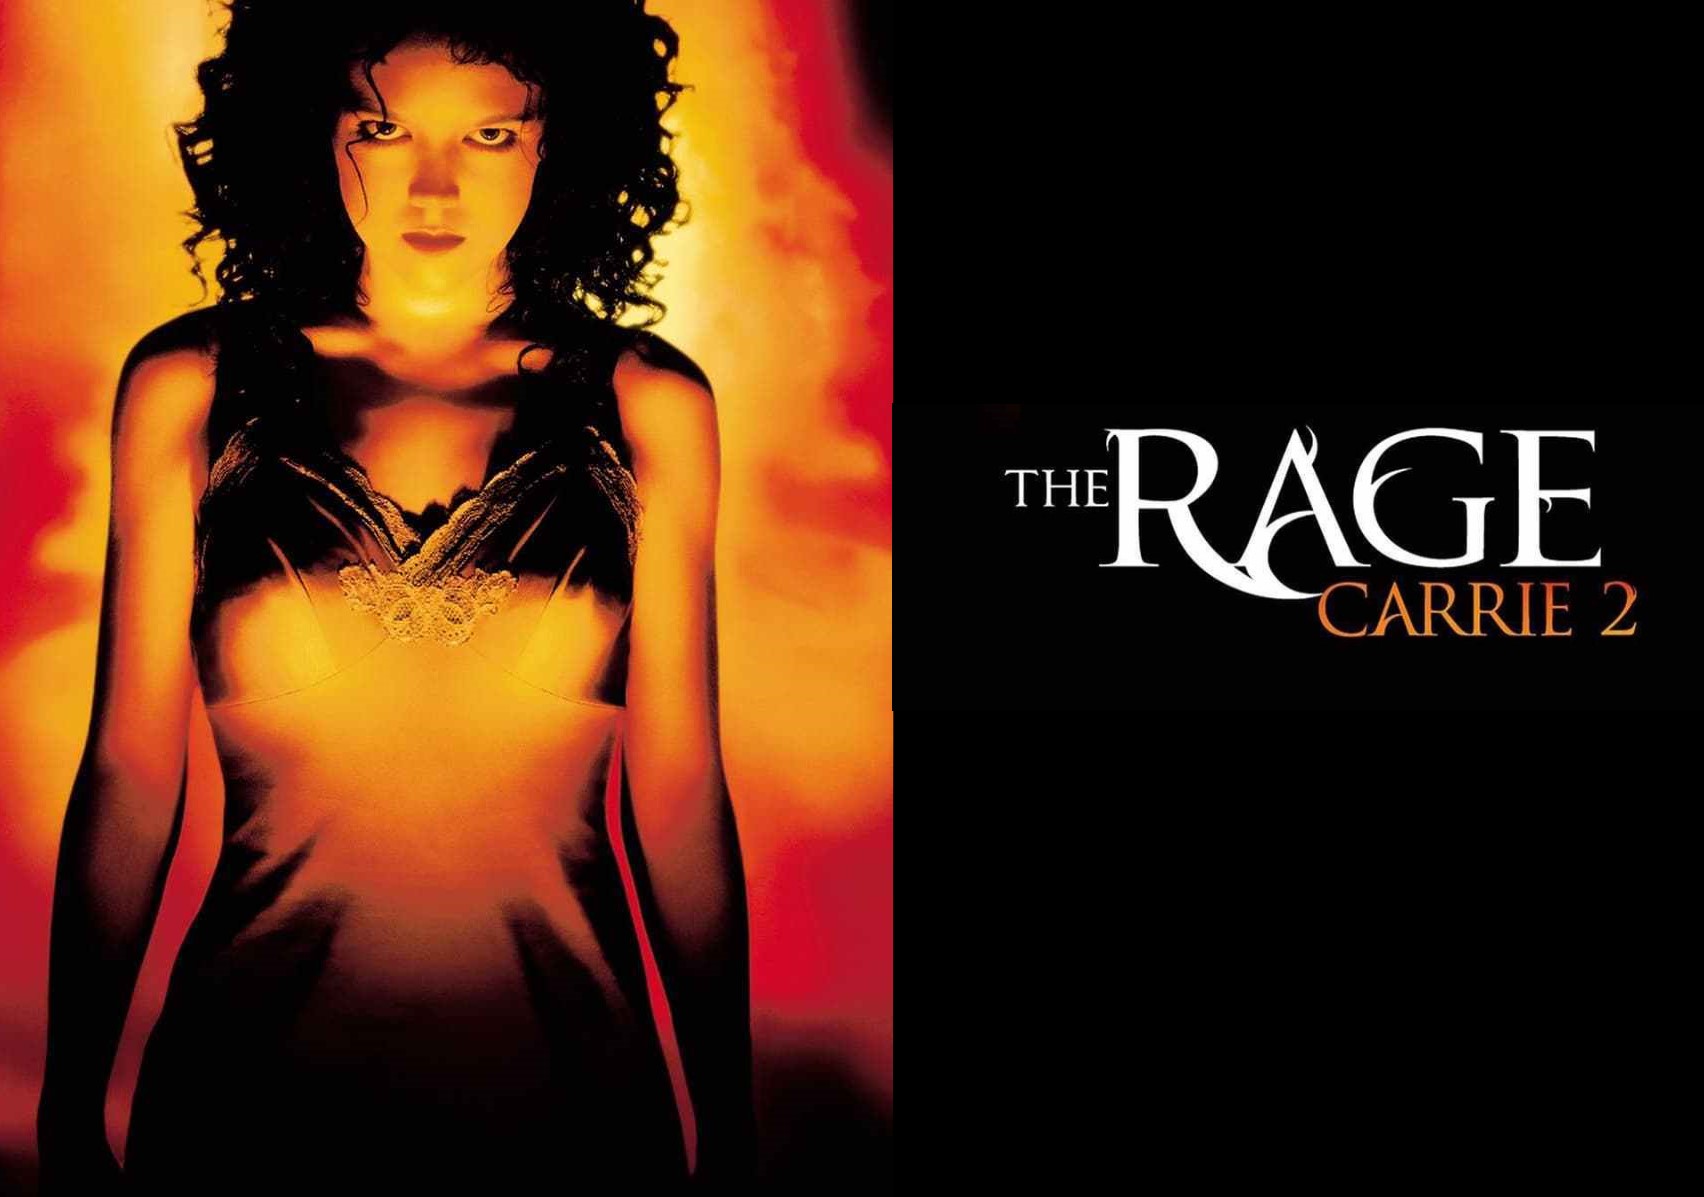 The Rage: Carrie 2 (1999) - Grave Reviews - Horror Movie Reviews